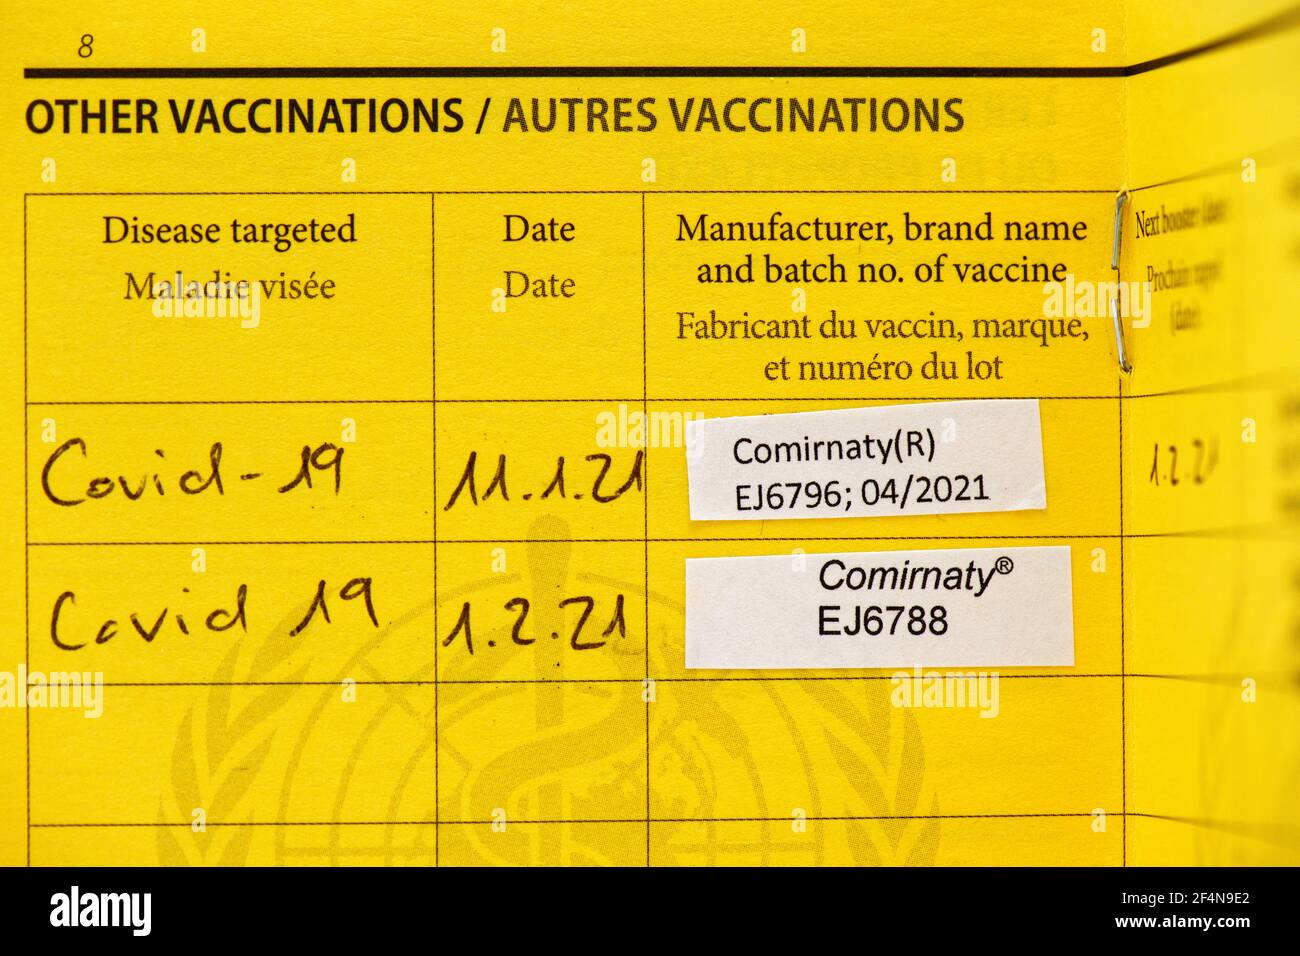 2 Covid vaccinations listed in a vaccination card Stock Photo